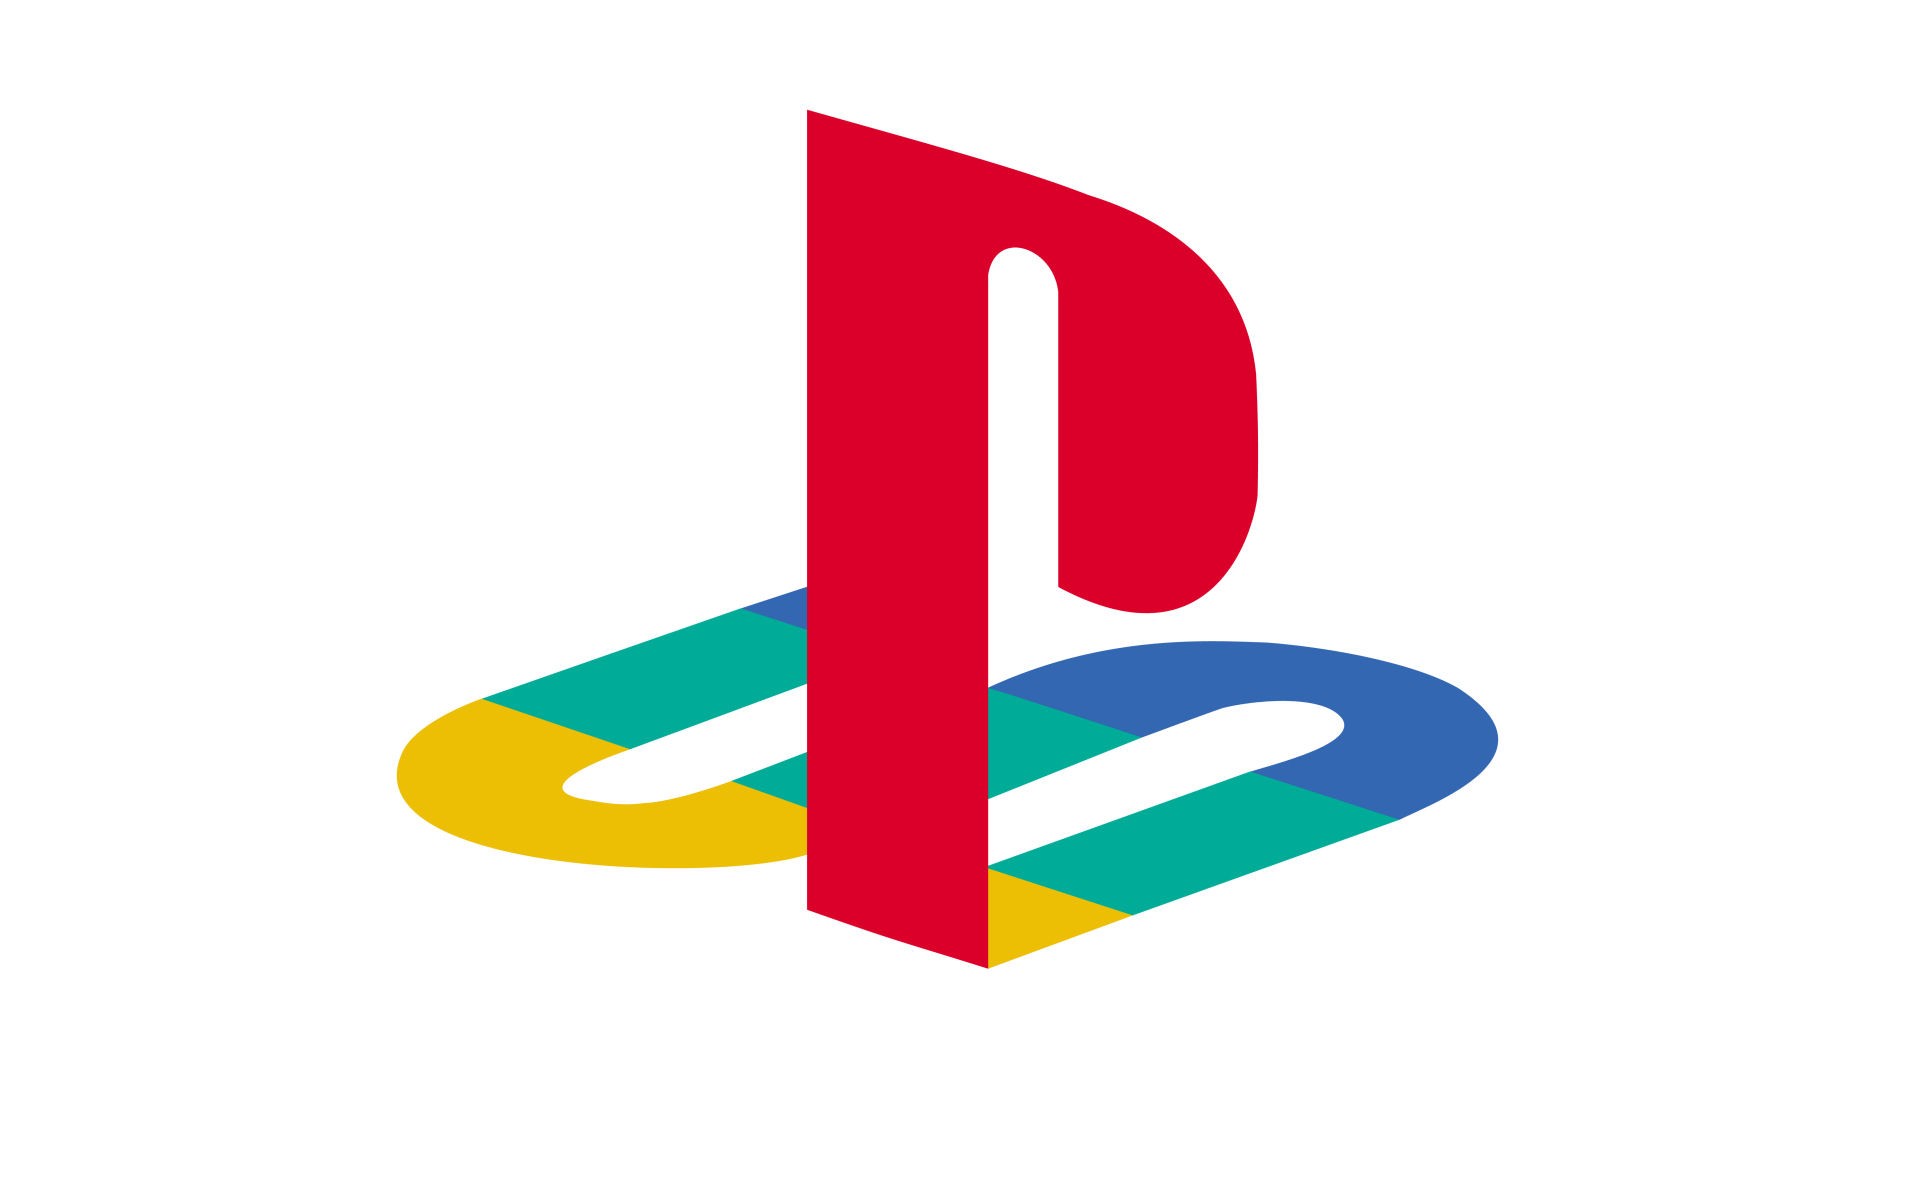 playstation, white, video game, logo, consoles